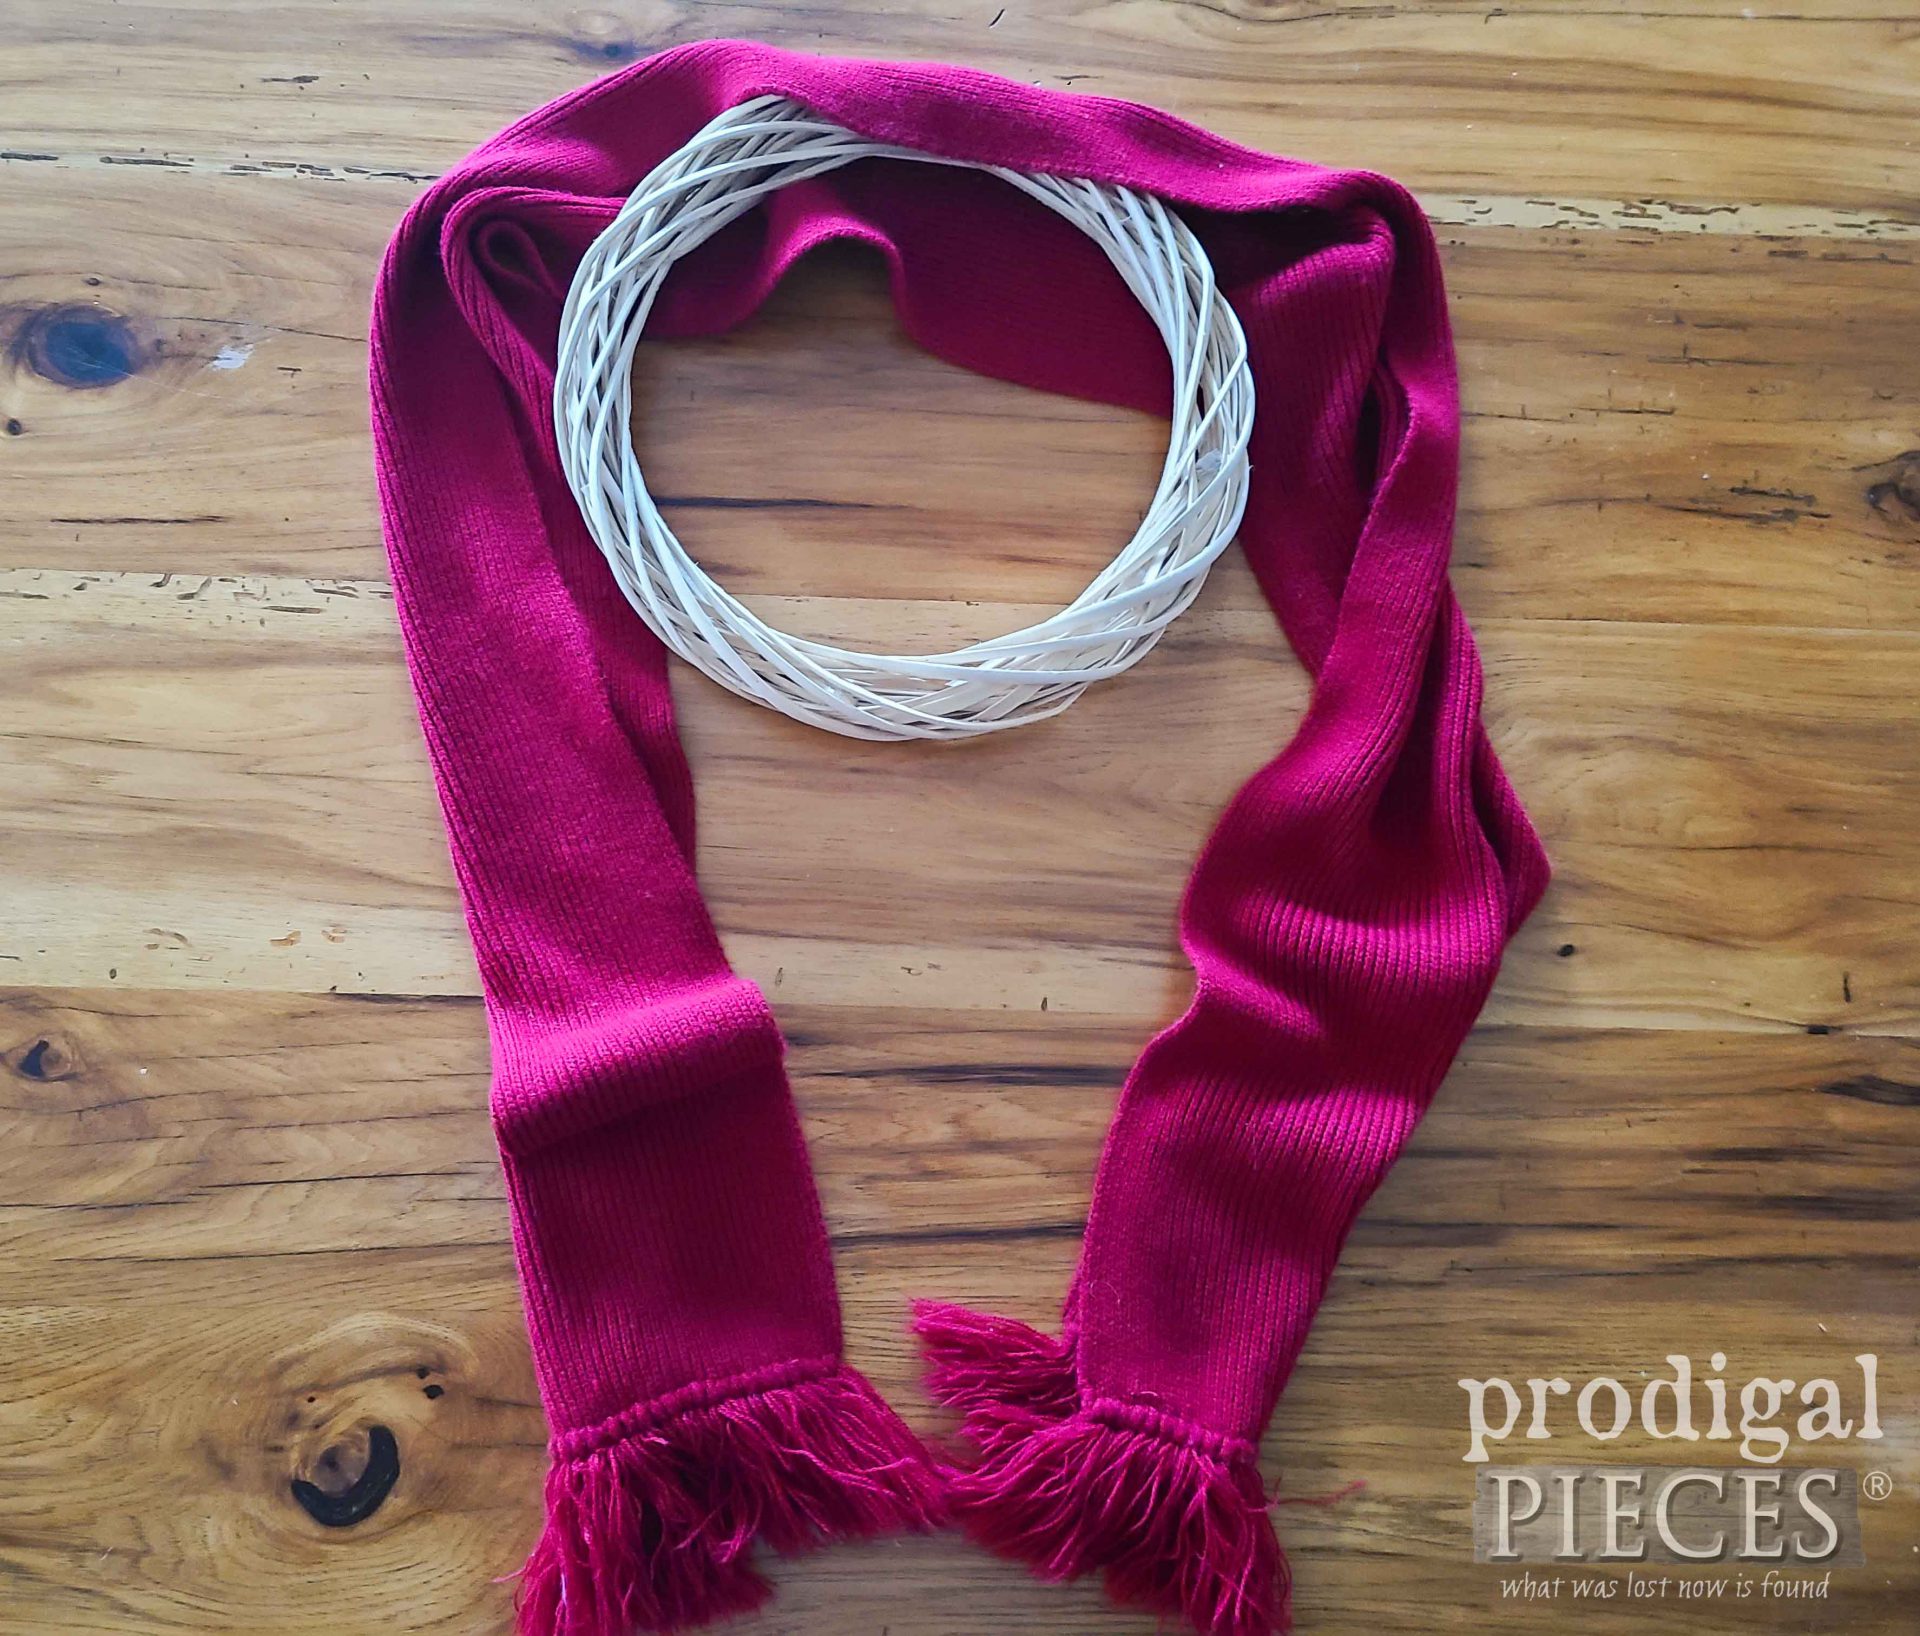 Wrapping Dollar Store Wreath with Thrifted Scarf | prodigalpieces.com